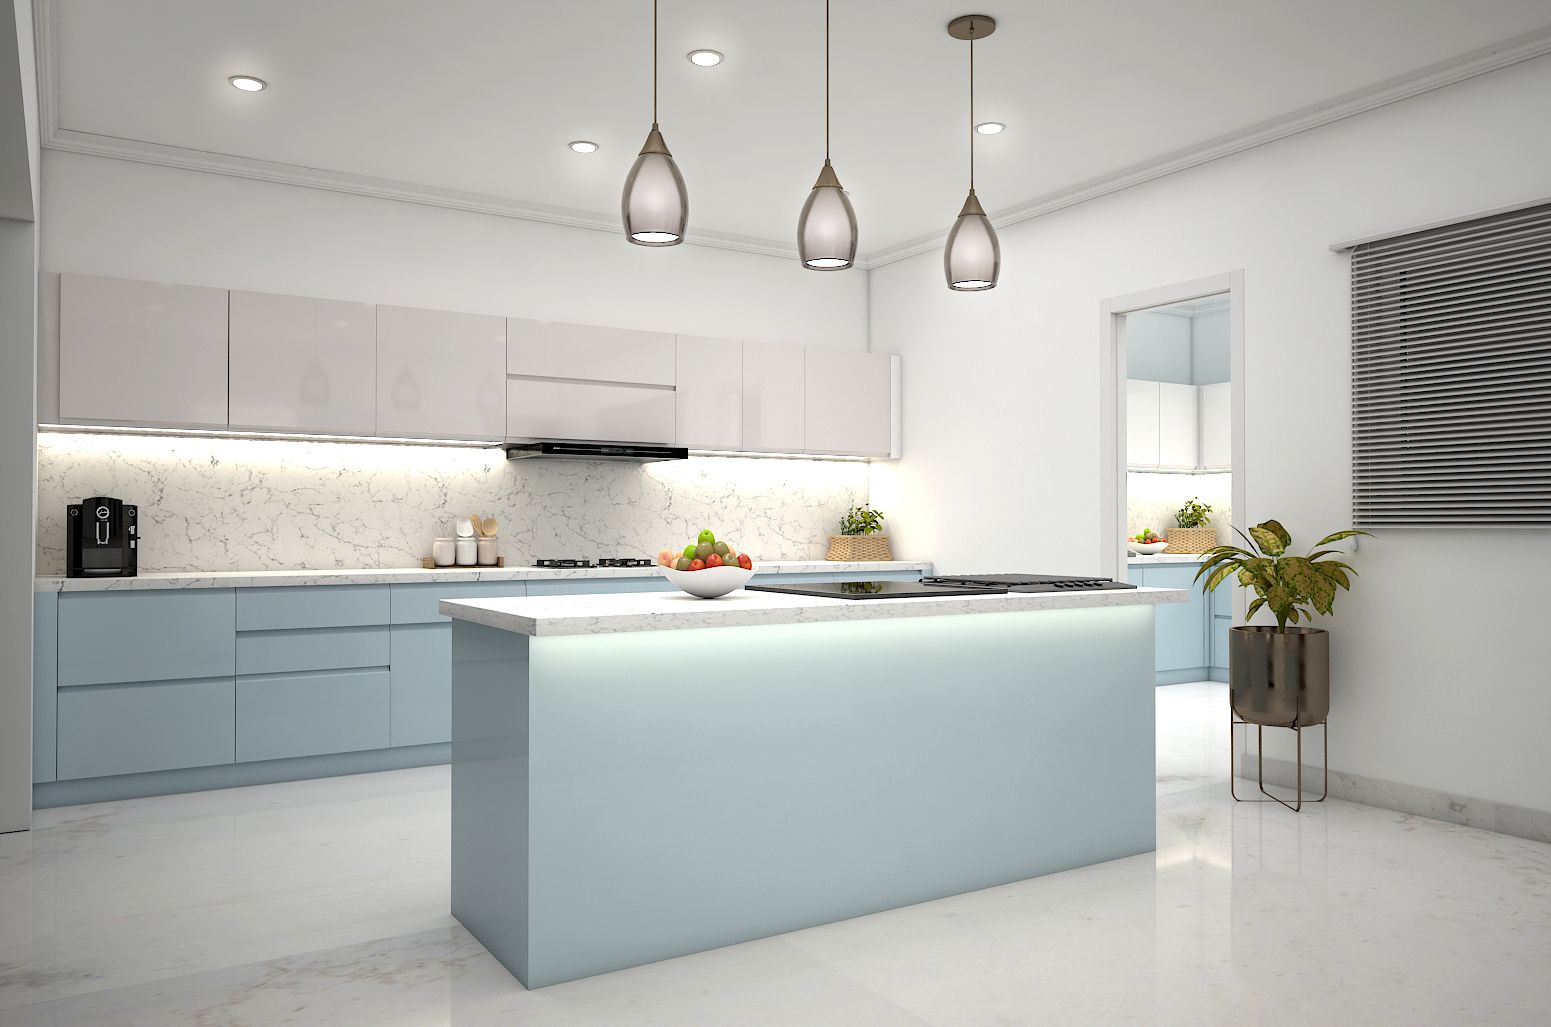 blue kitchen design with a kitchen island and decorative lighting